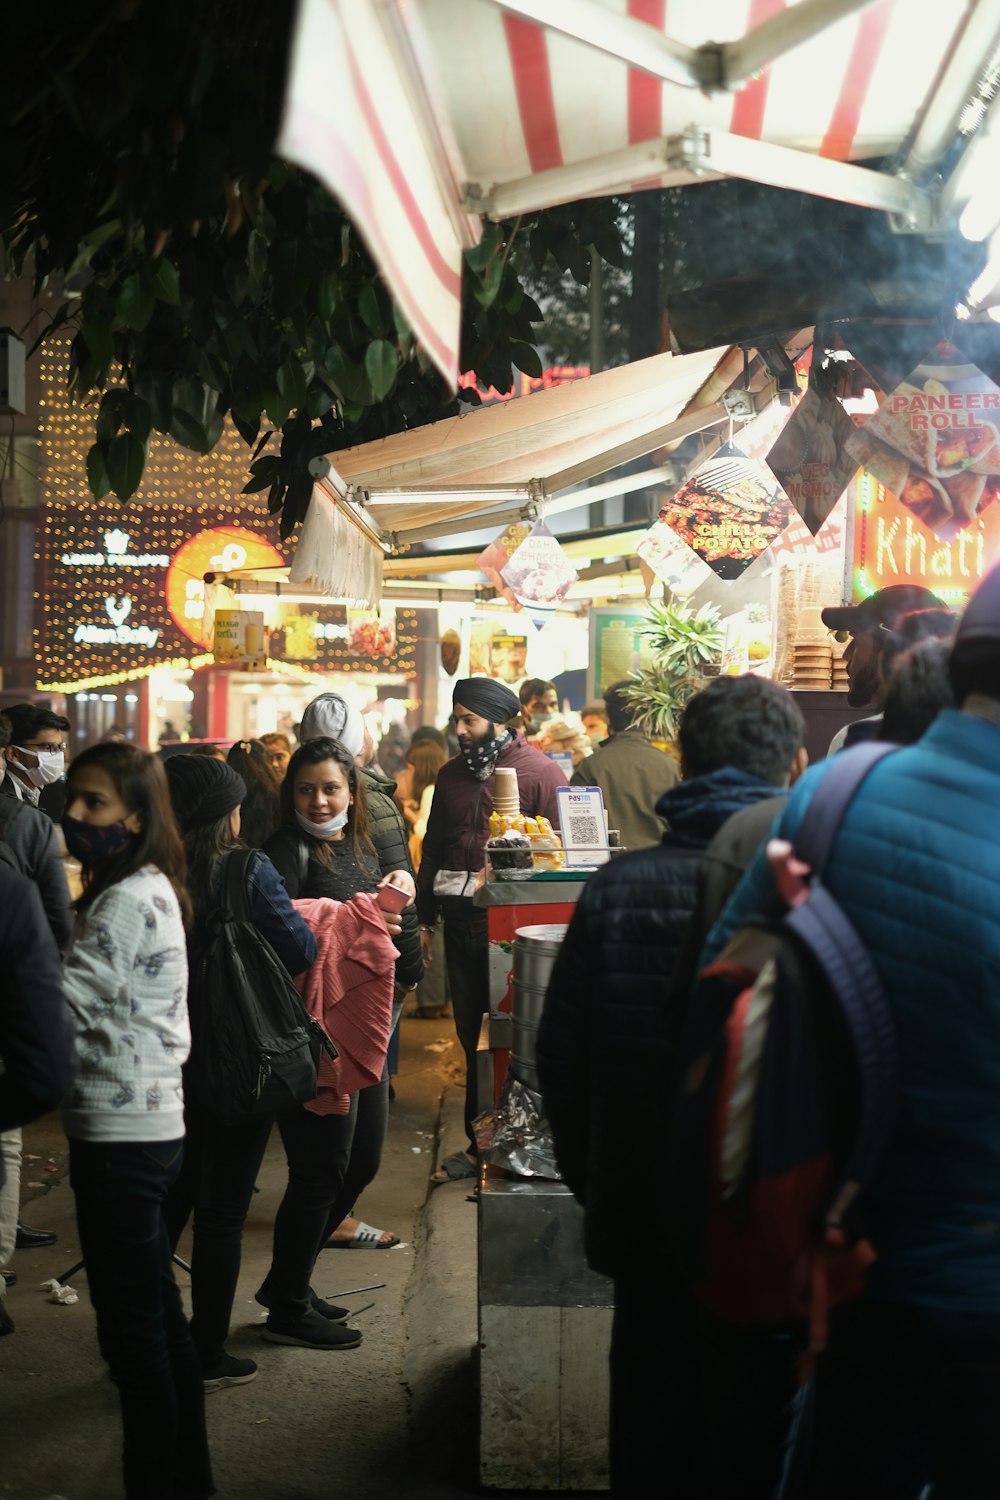 a crowd of people standing around a food stand